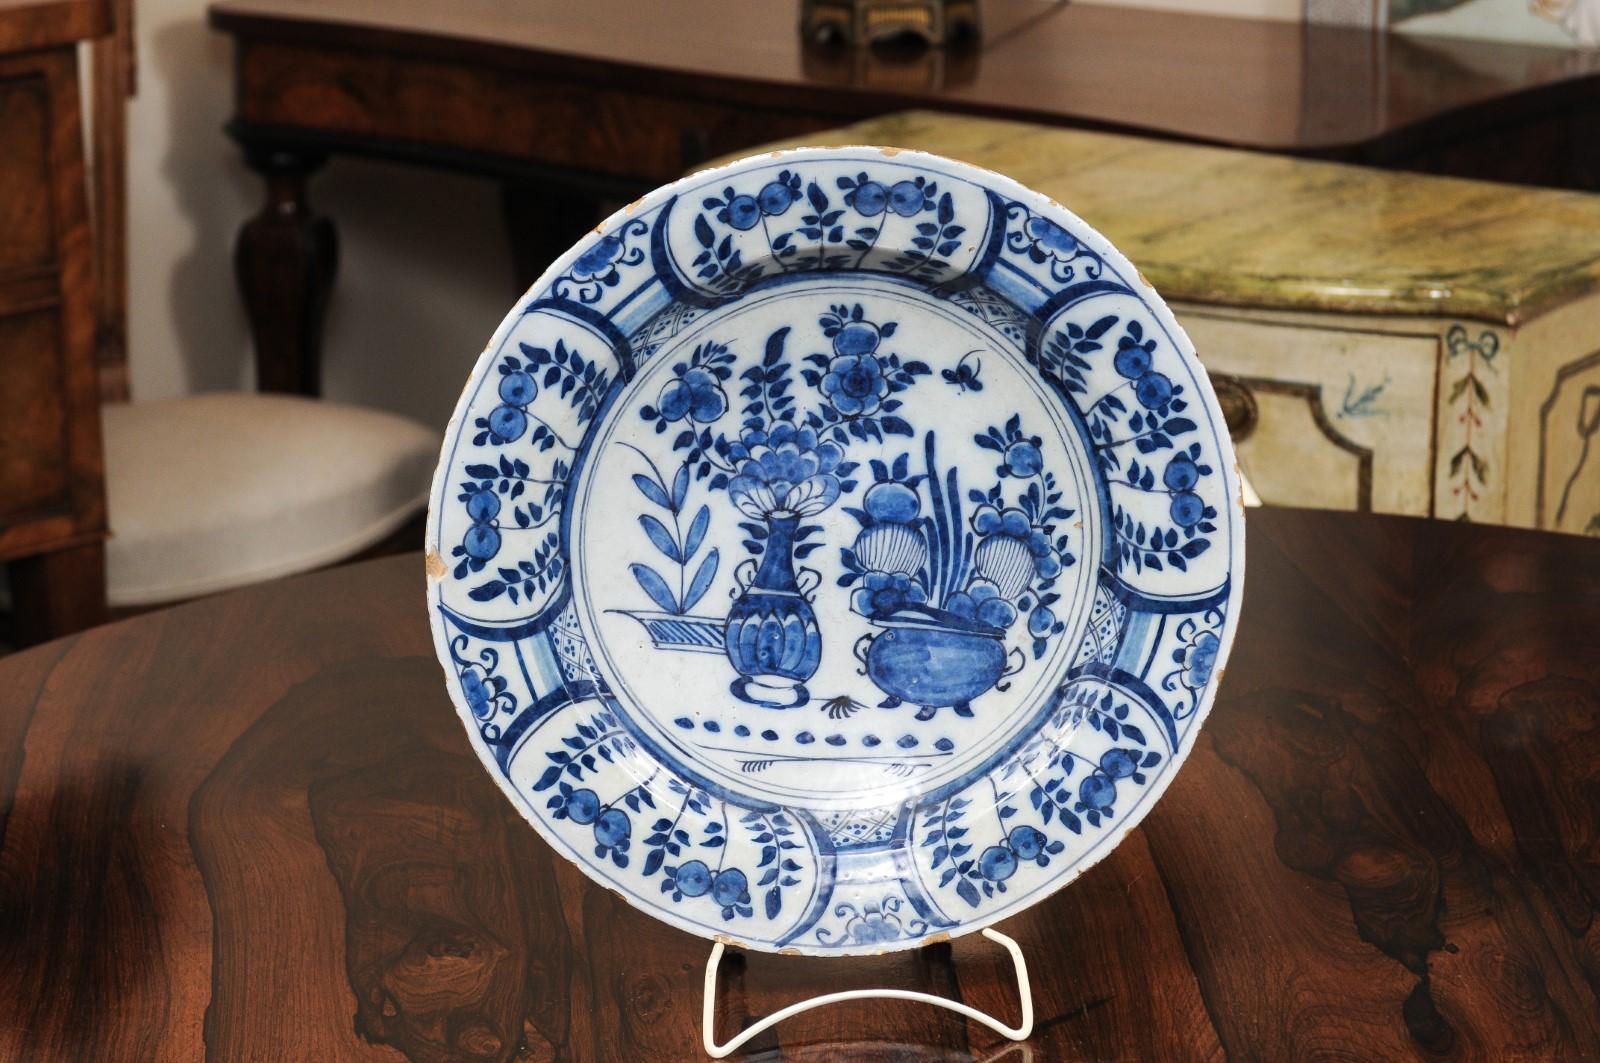 The 18th century Dutch blue and white charger with foliate design.

 